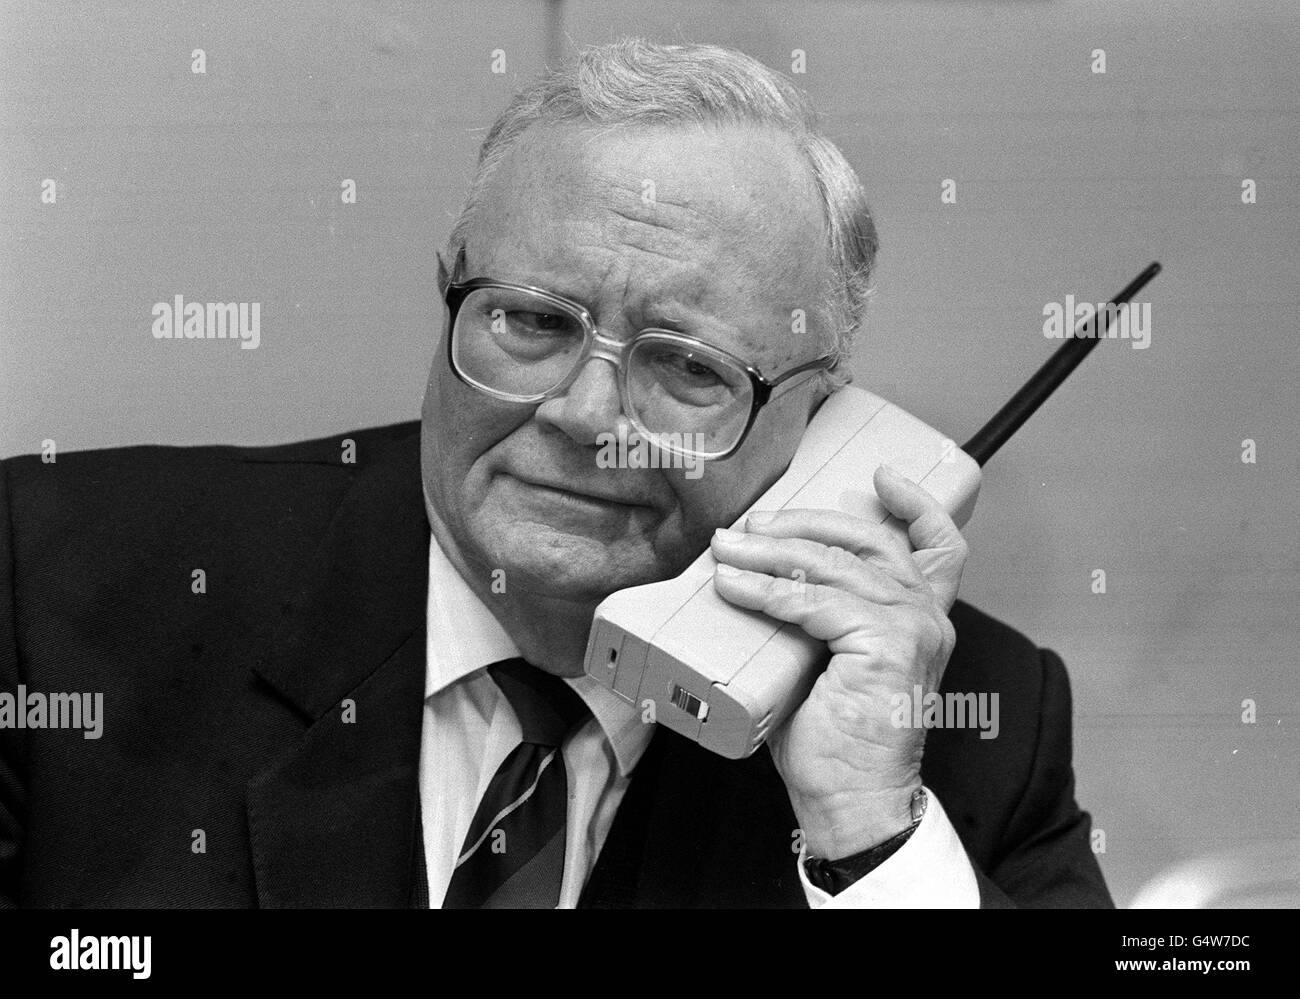 Sir Harry Secombe with mobile phone : 1990 Stock Photo